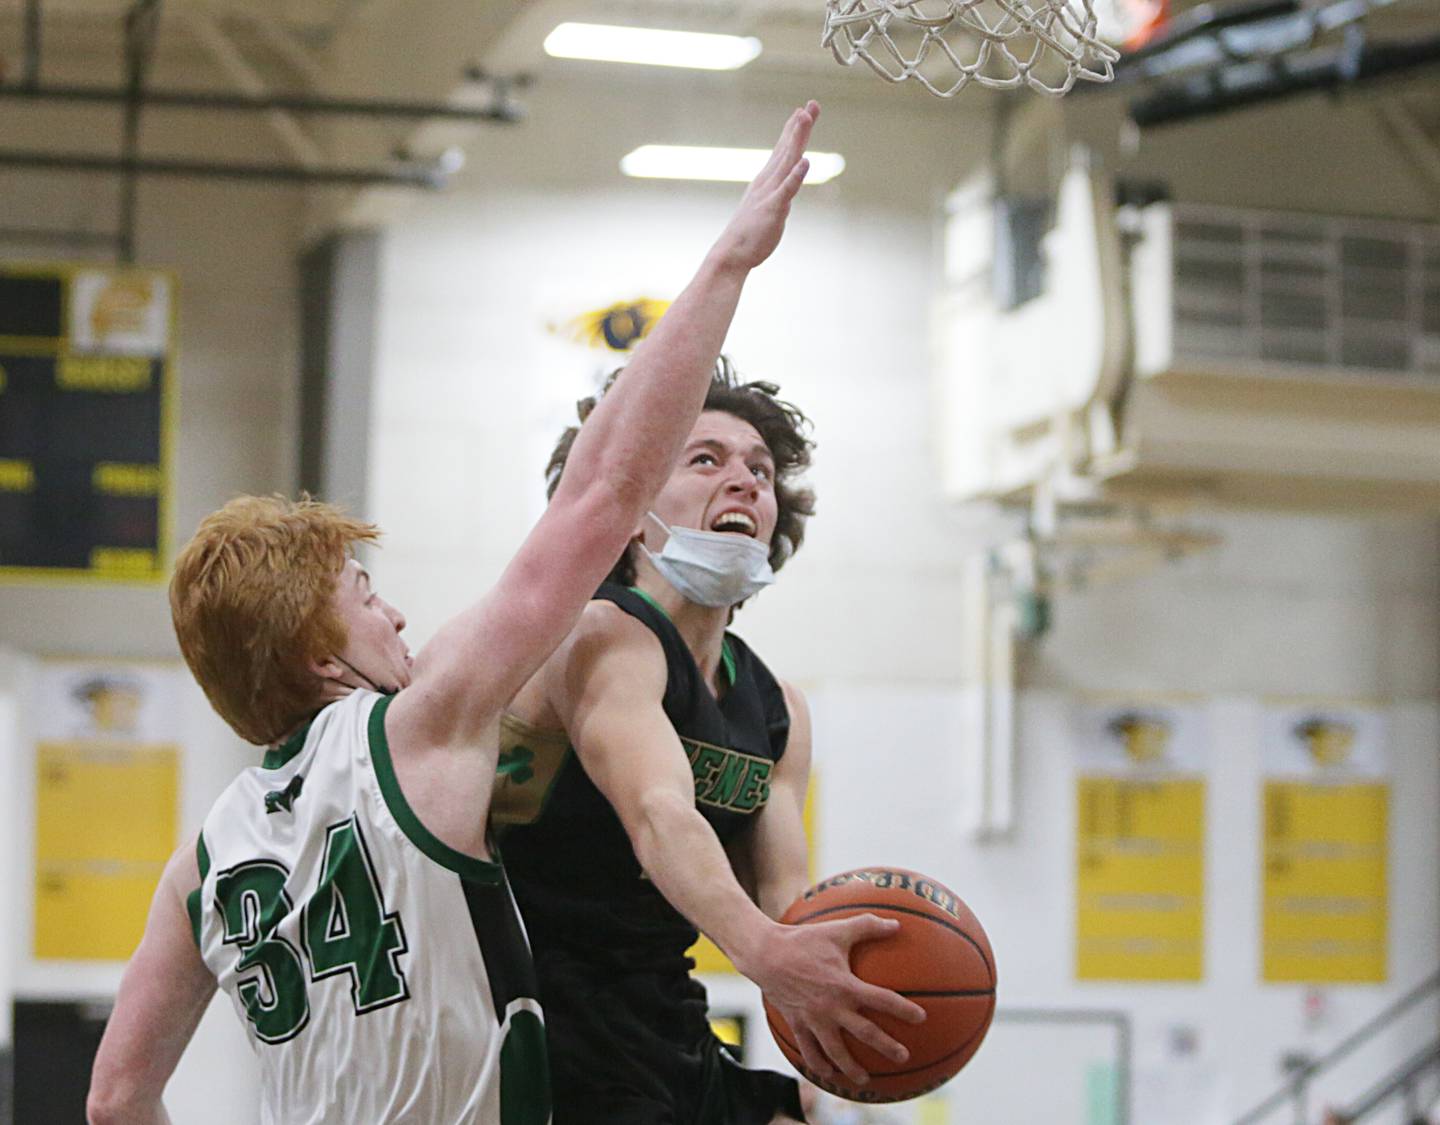 Seneca’s Zach Pfiefer (3) runs in the lane to score a basket over Midland’s Ryan Riddell (34) at the Tri-County Conference Tournament on Friday Jan. 28, 2022 in Granville.